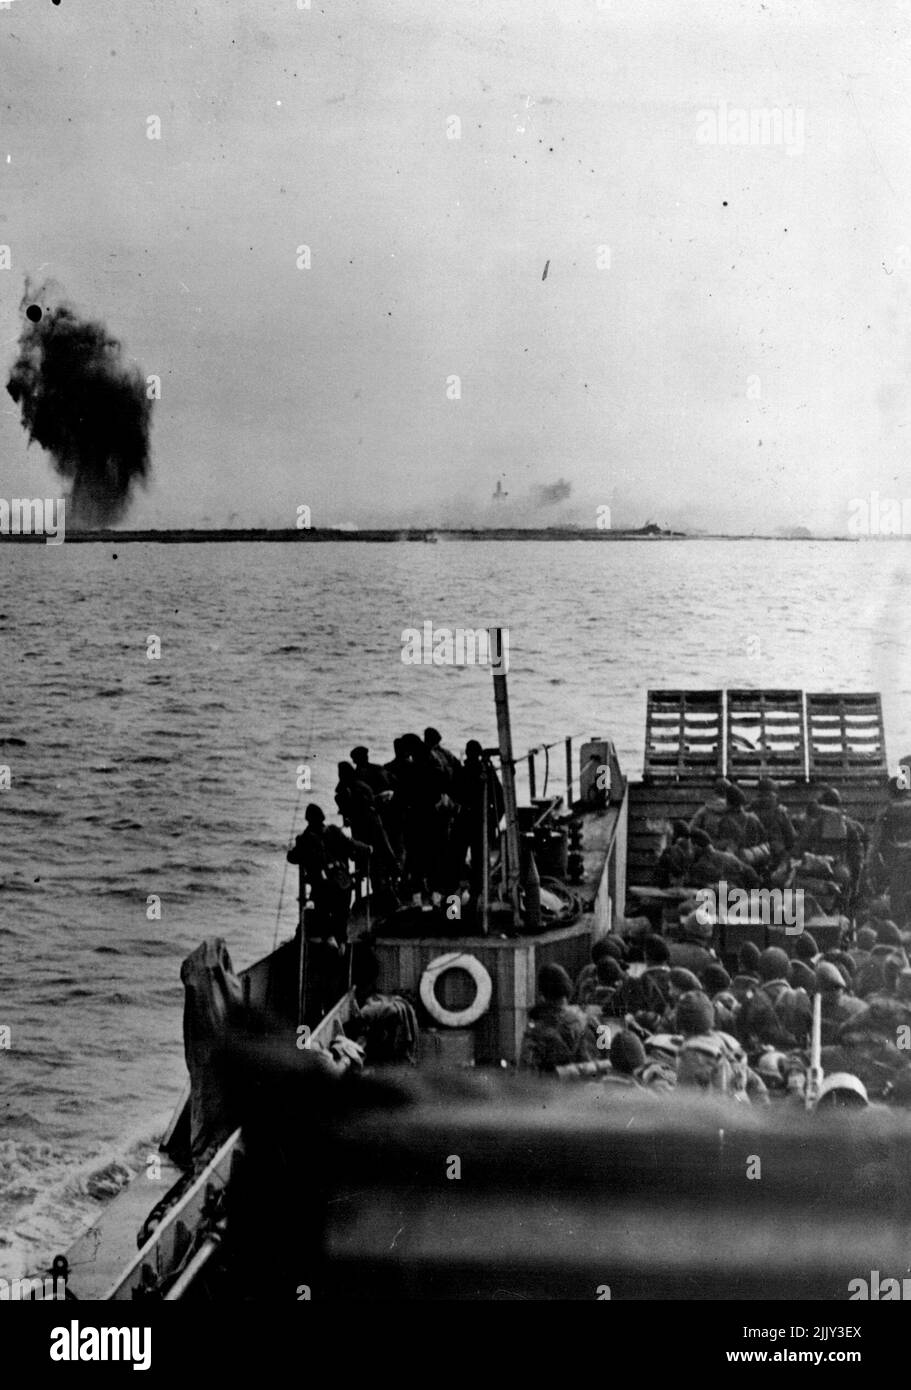 lcheren At West Kapelle -- Explosion and fire ashore after Typhoon attack, as landing craft olose in. The final phase of the battle to free the approaches to the Belgium port of Antwerp began Nov.1; When Royal Marine Commandos landed at dawn at West Kapelle., The Western most point of the island of Walcheren. By dusk the town had been captured and a bridgehead 3,000 yards long to the south had been established. From this bridgehead the Commandos pushed north and south the next day., along the dyke beside the seato Domburg and Zoutelade. January 01, 1945. (Photo by British Official Photograph). Stock Photo